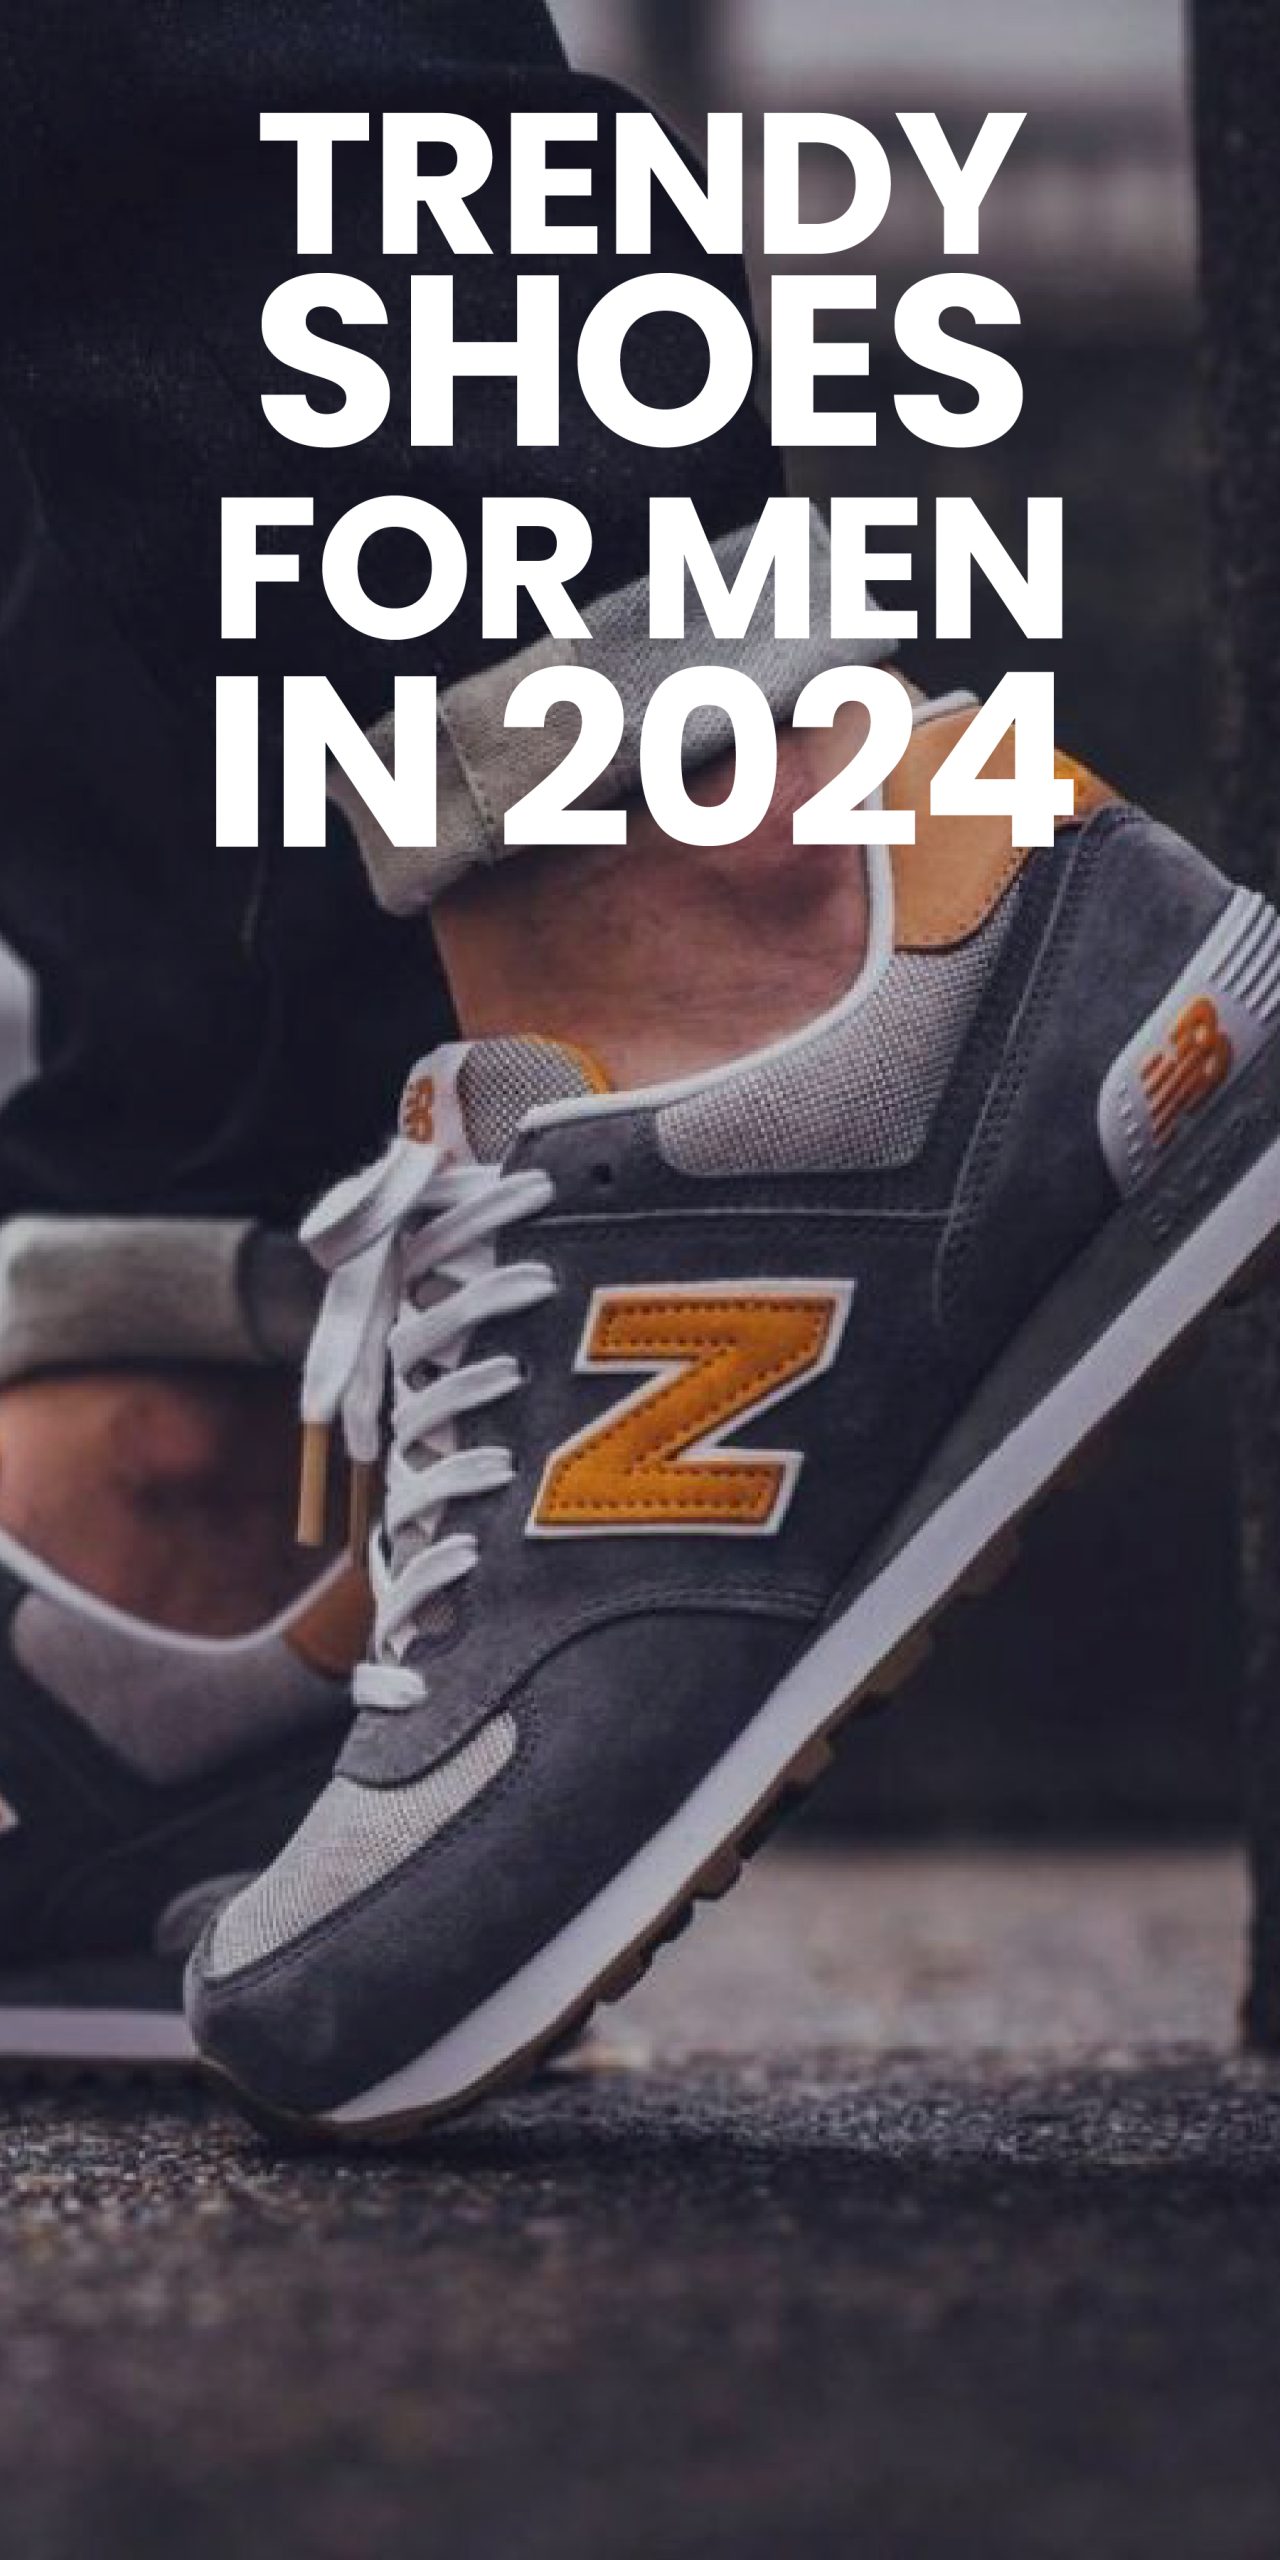 TRENDY SHOES FOR MEN IN 2024